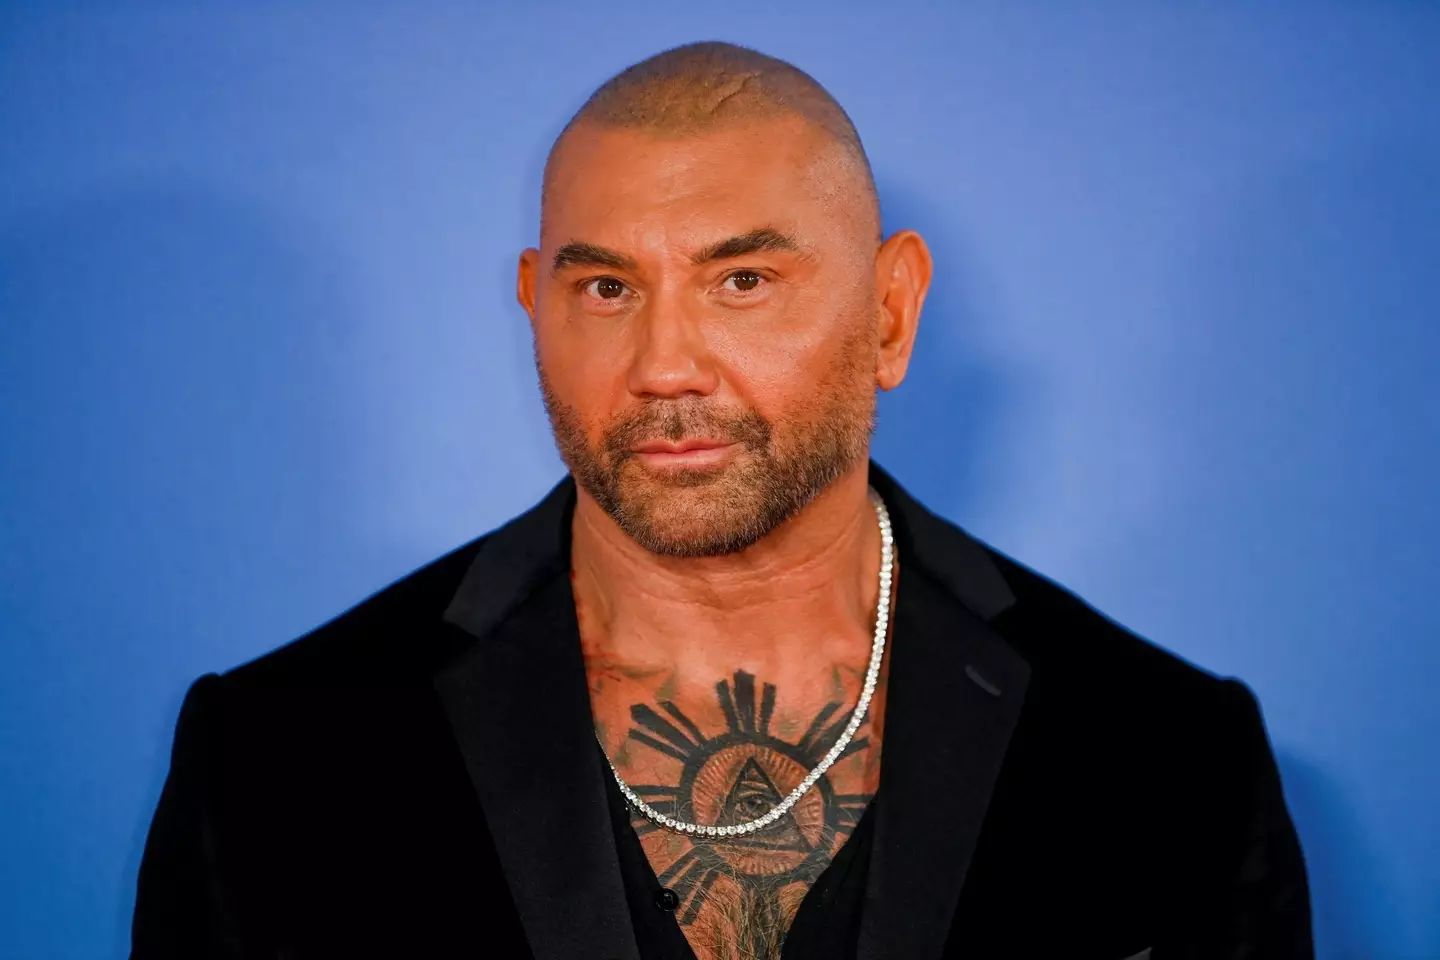 Dave Bautista has previously been up for a role in Gears of War.